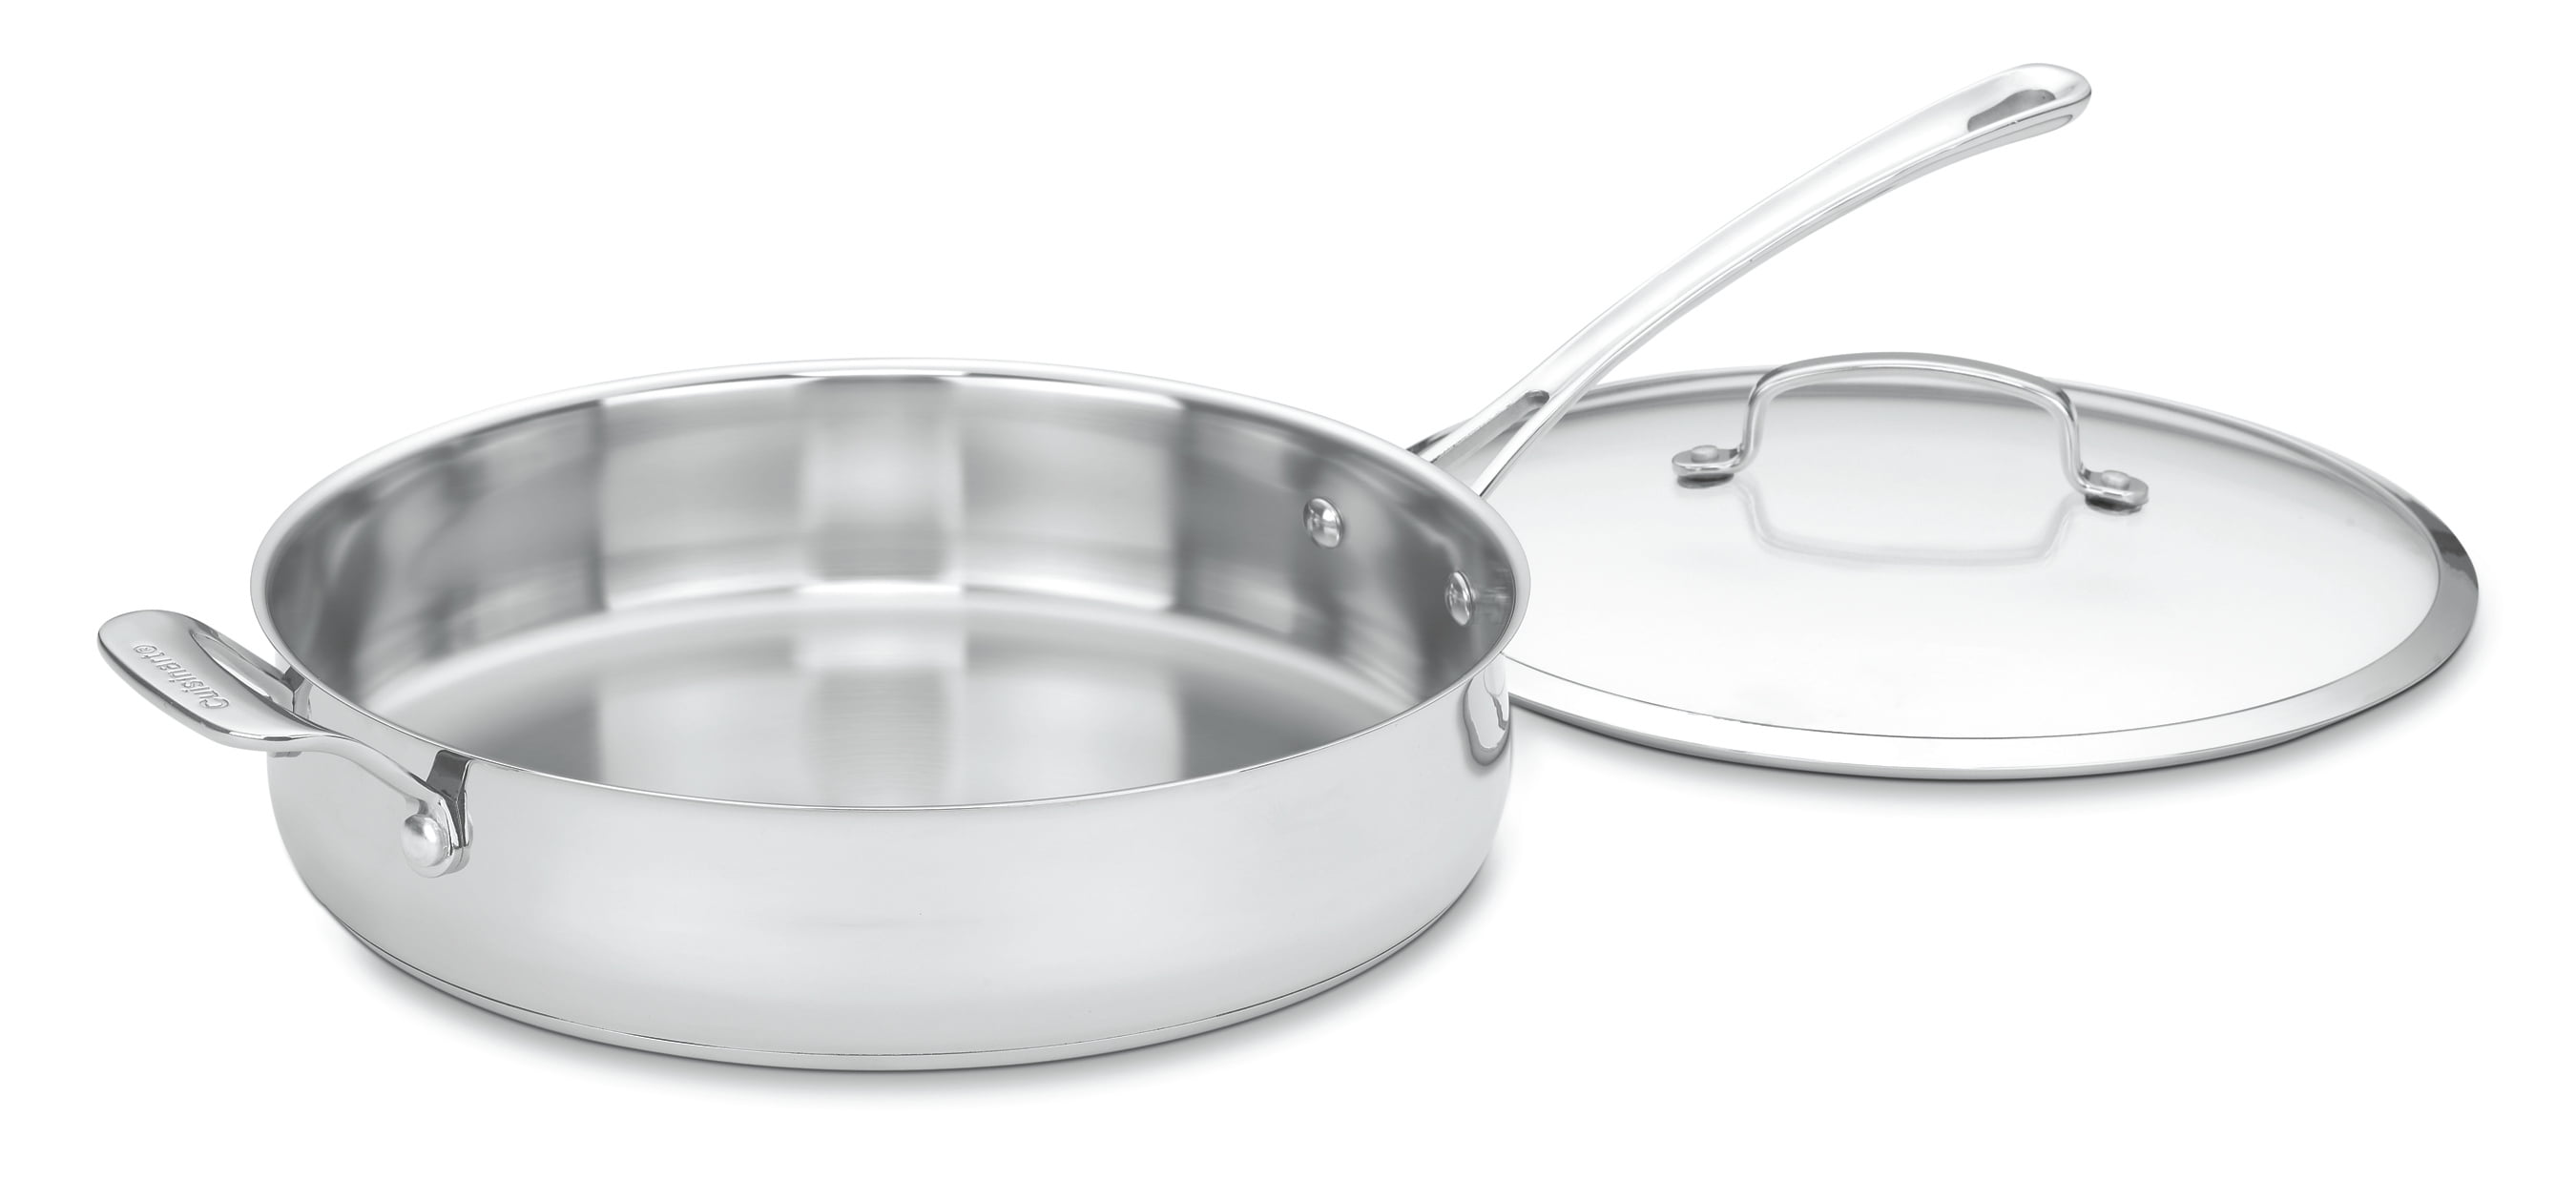 SmartChef Stainless Steel All-in-One Pan, 3.5 Quarts